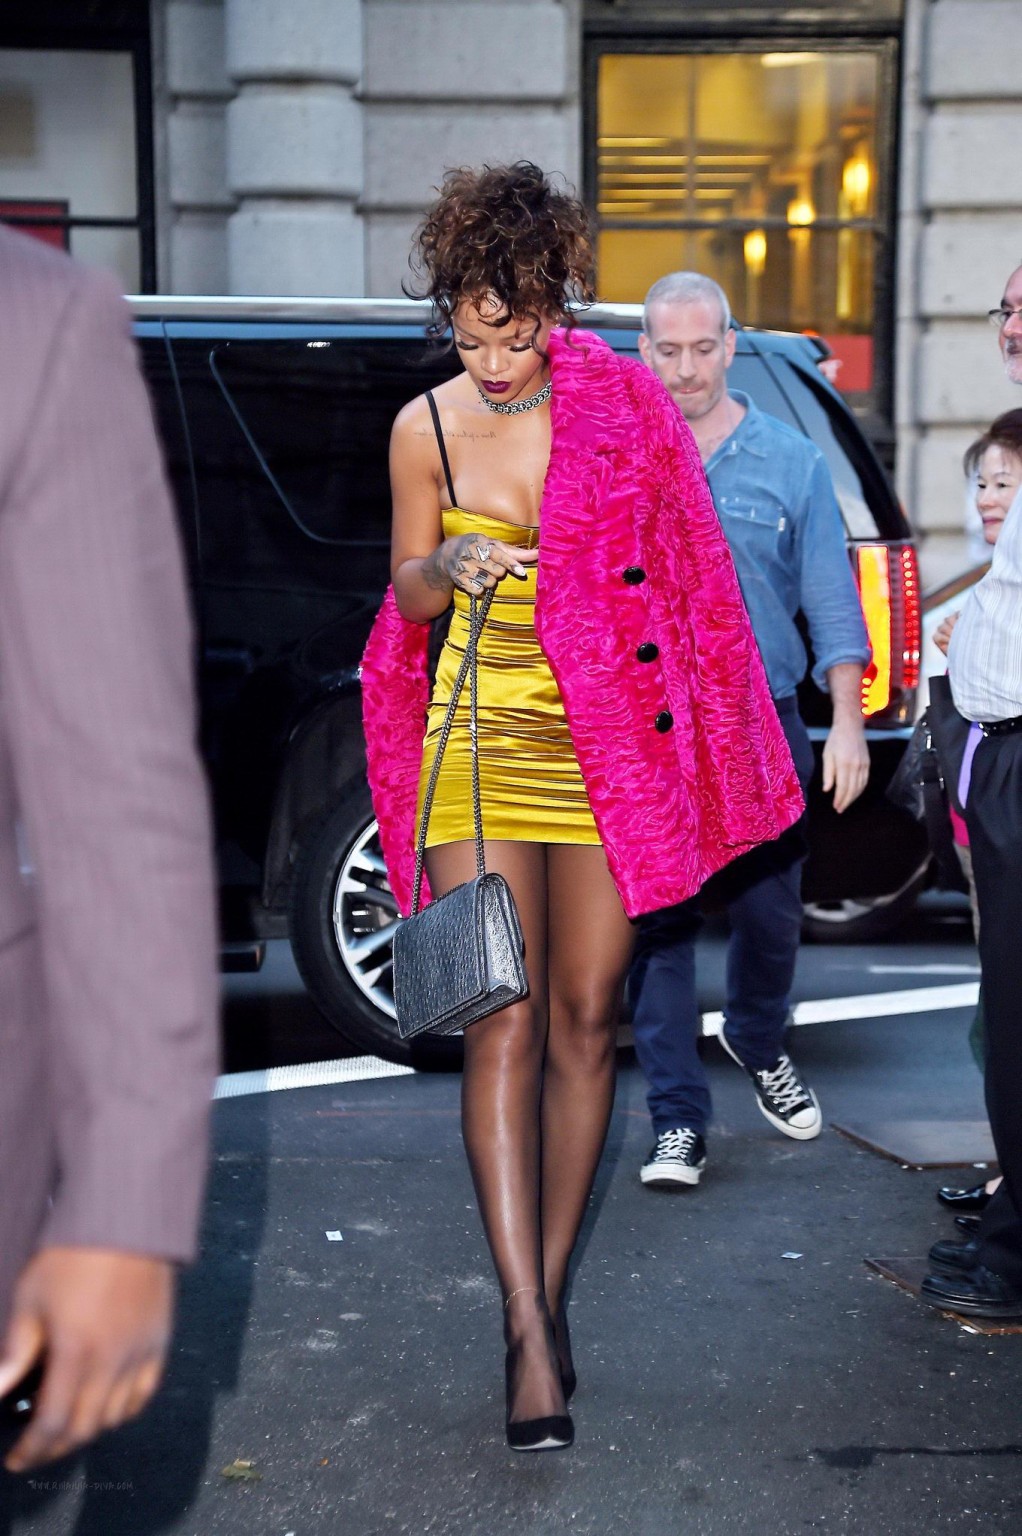 Rihanna shows cleavage and legs wearing a little yellow dress outside Nobu resta #75183294